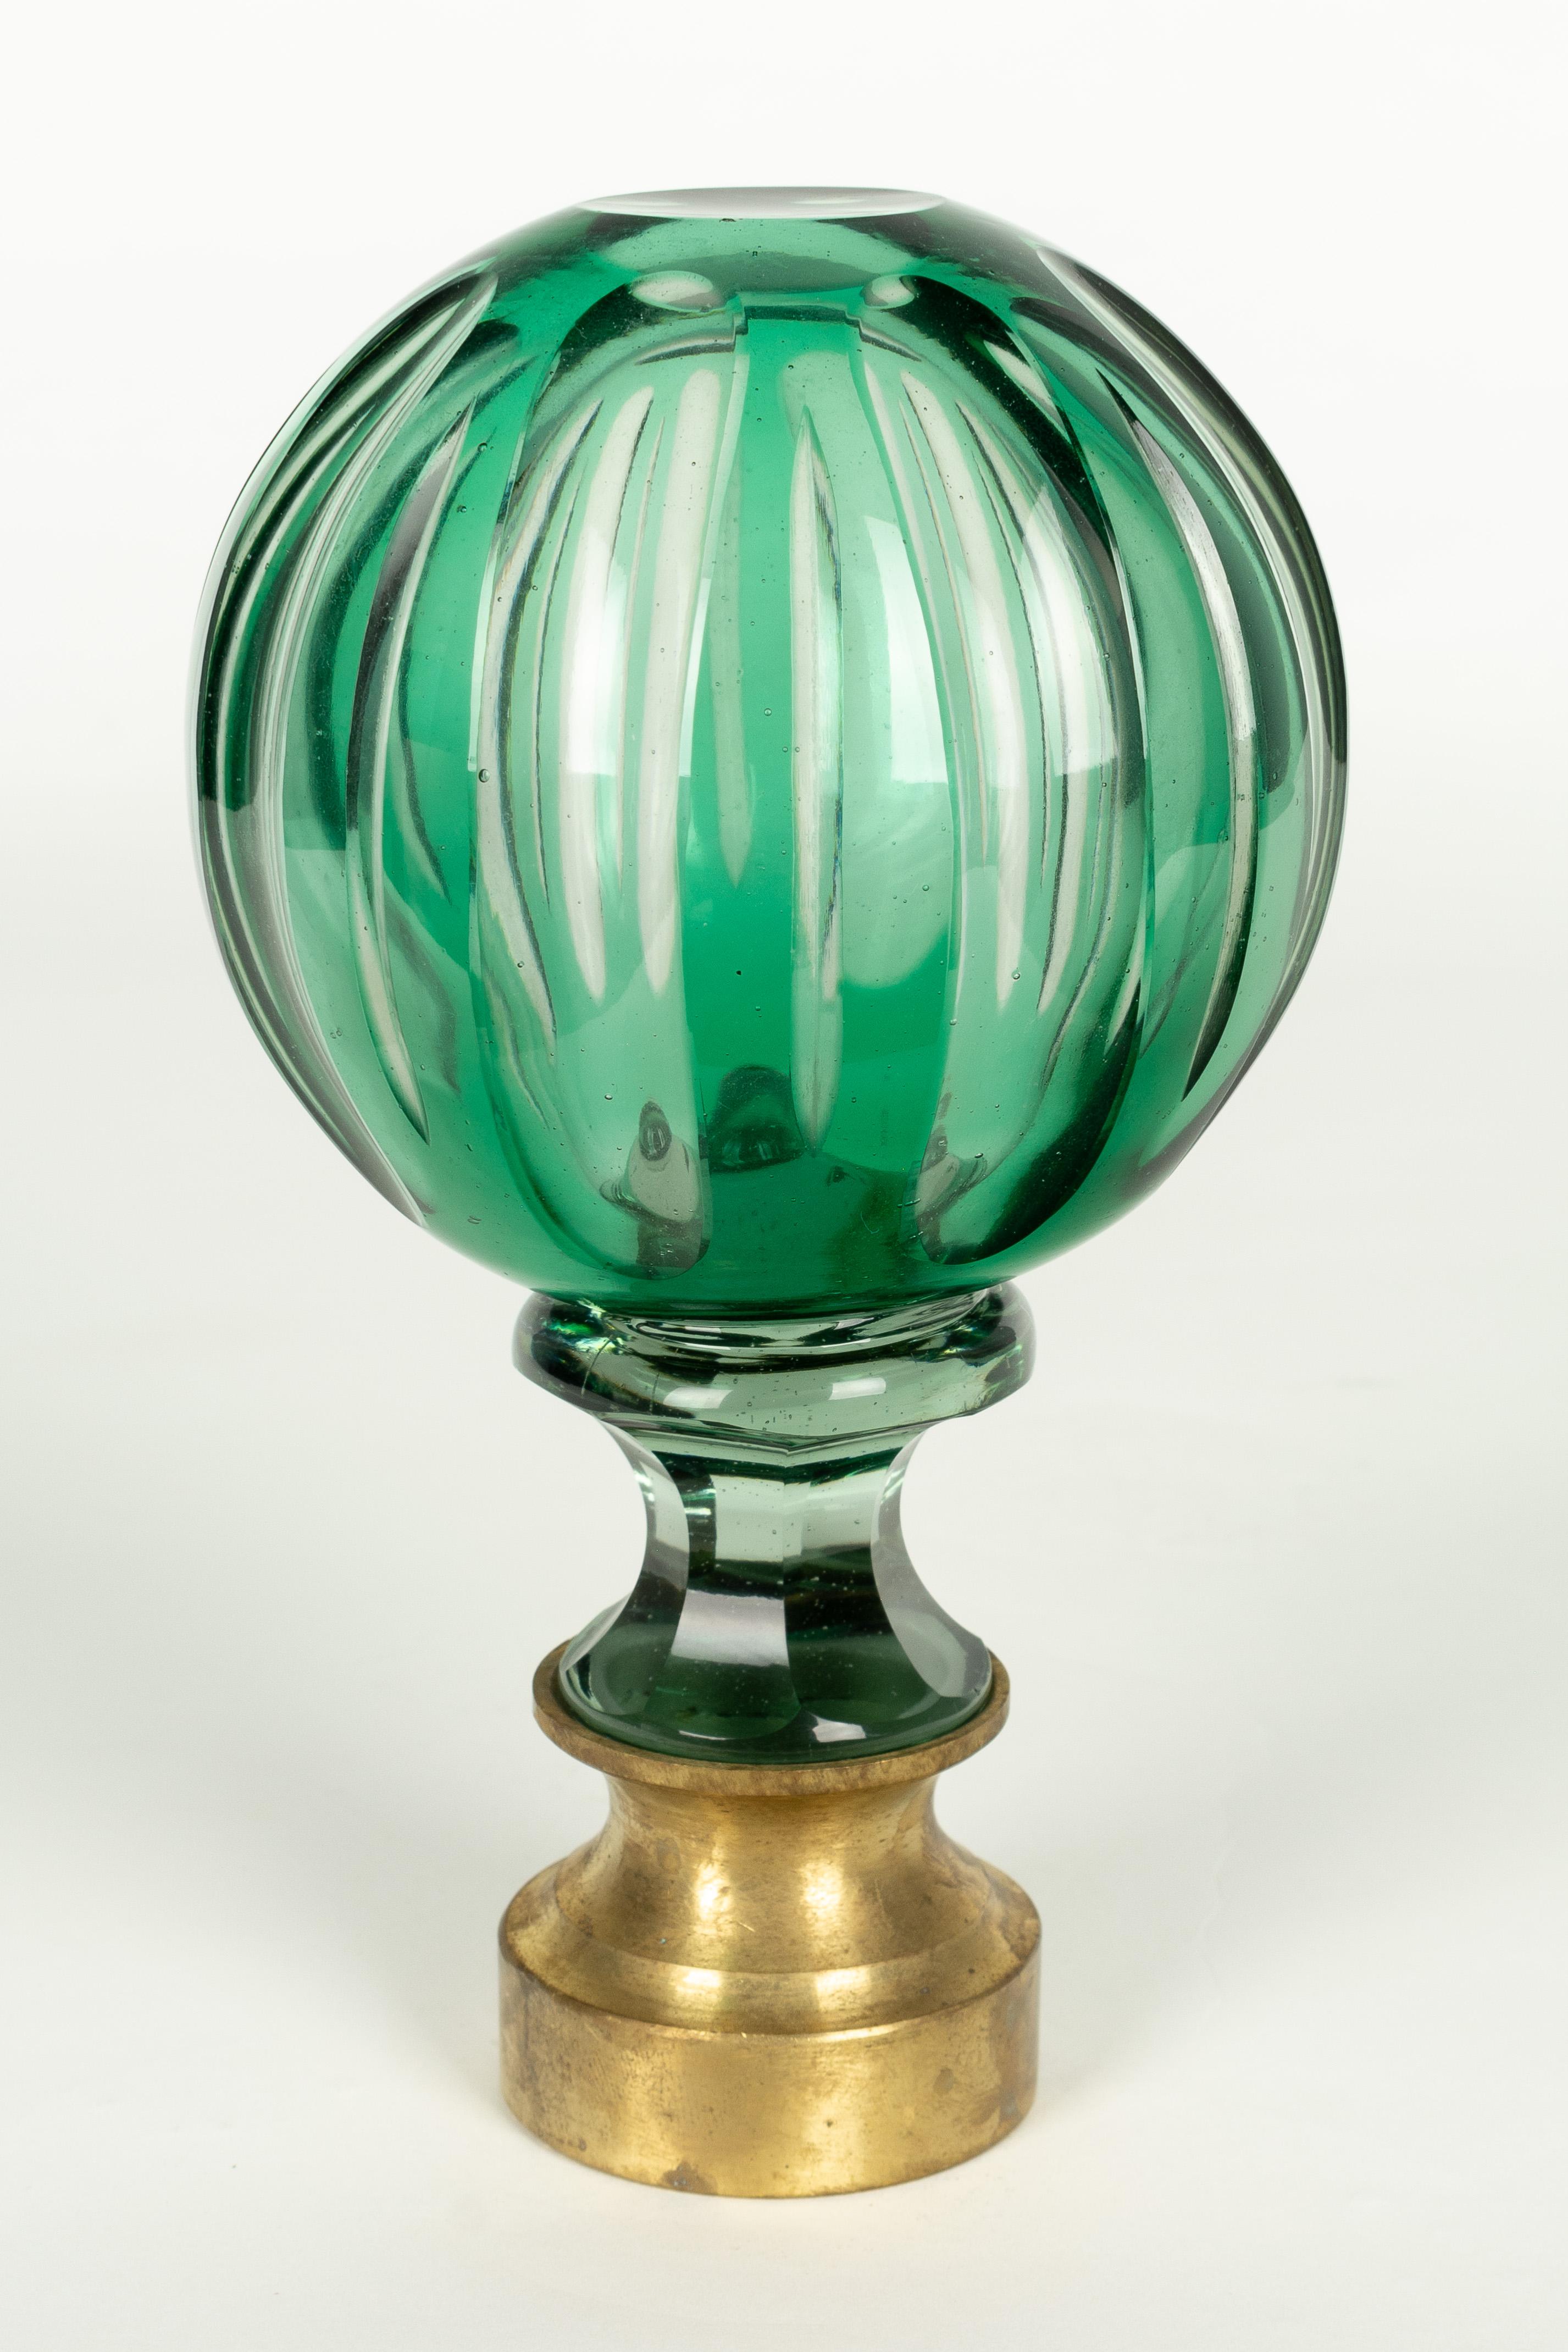 A French crystal newel post finial or boule d'escalier. Made of two layers of cased glass with the green glass surface cut back to the clear glass underneath. Brass hardware base. These wonderful finials were used as decorative elements at the